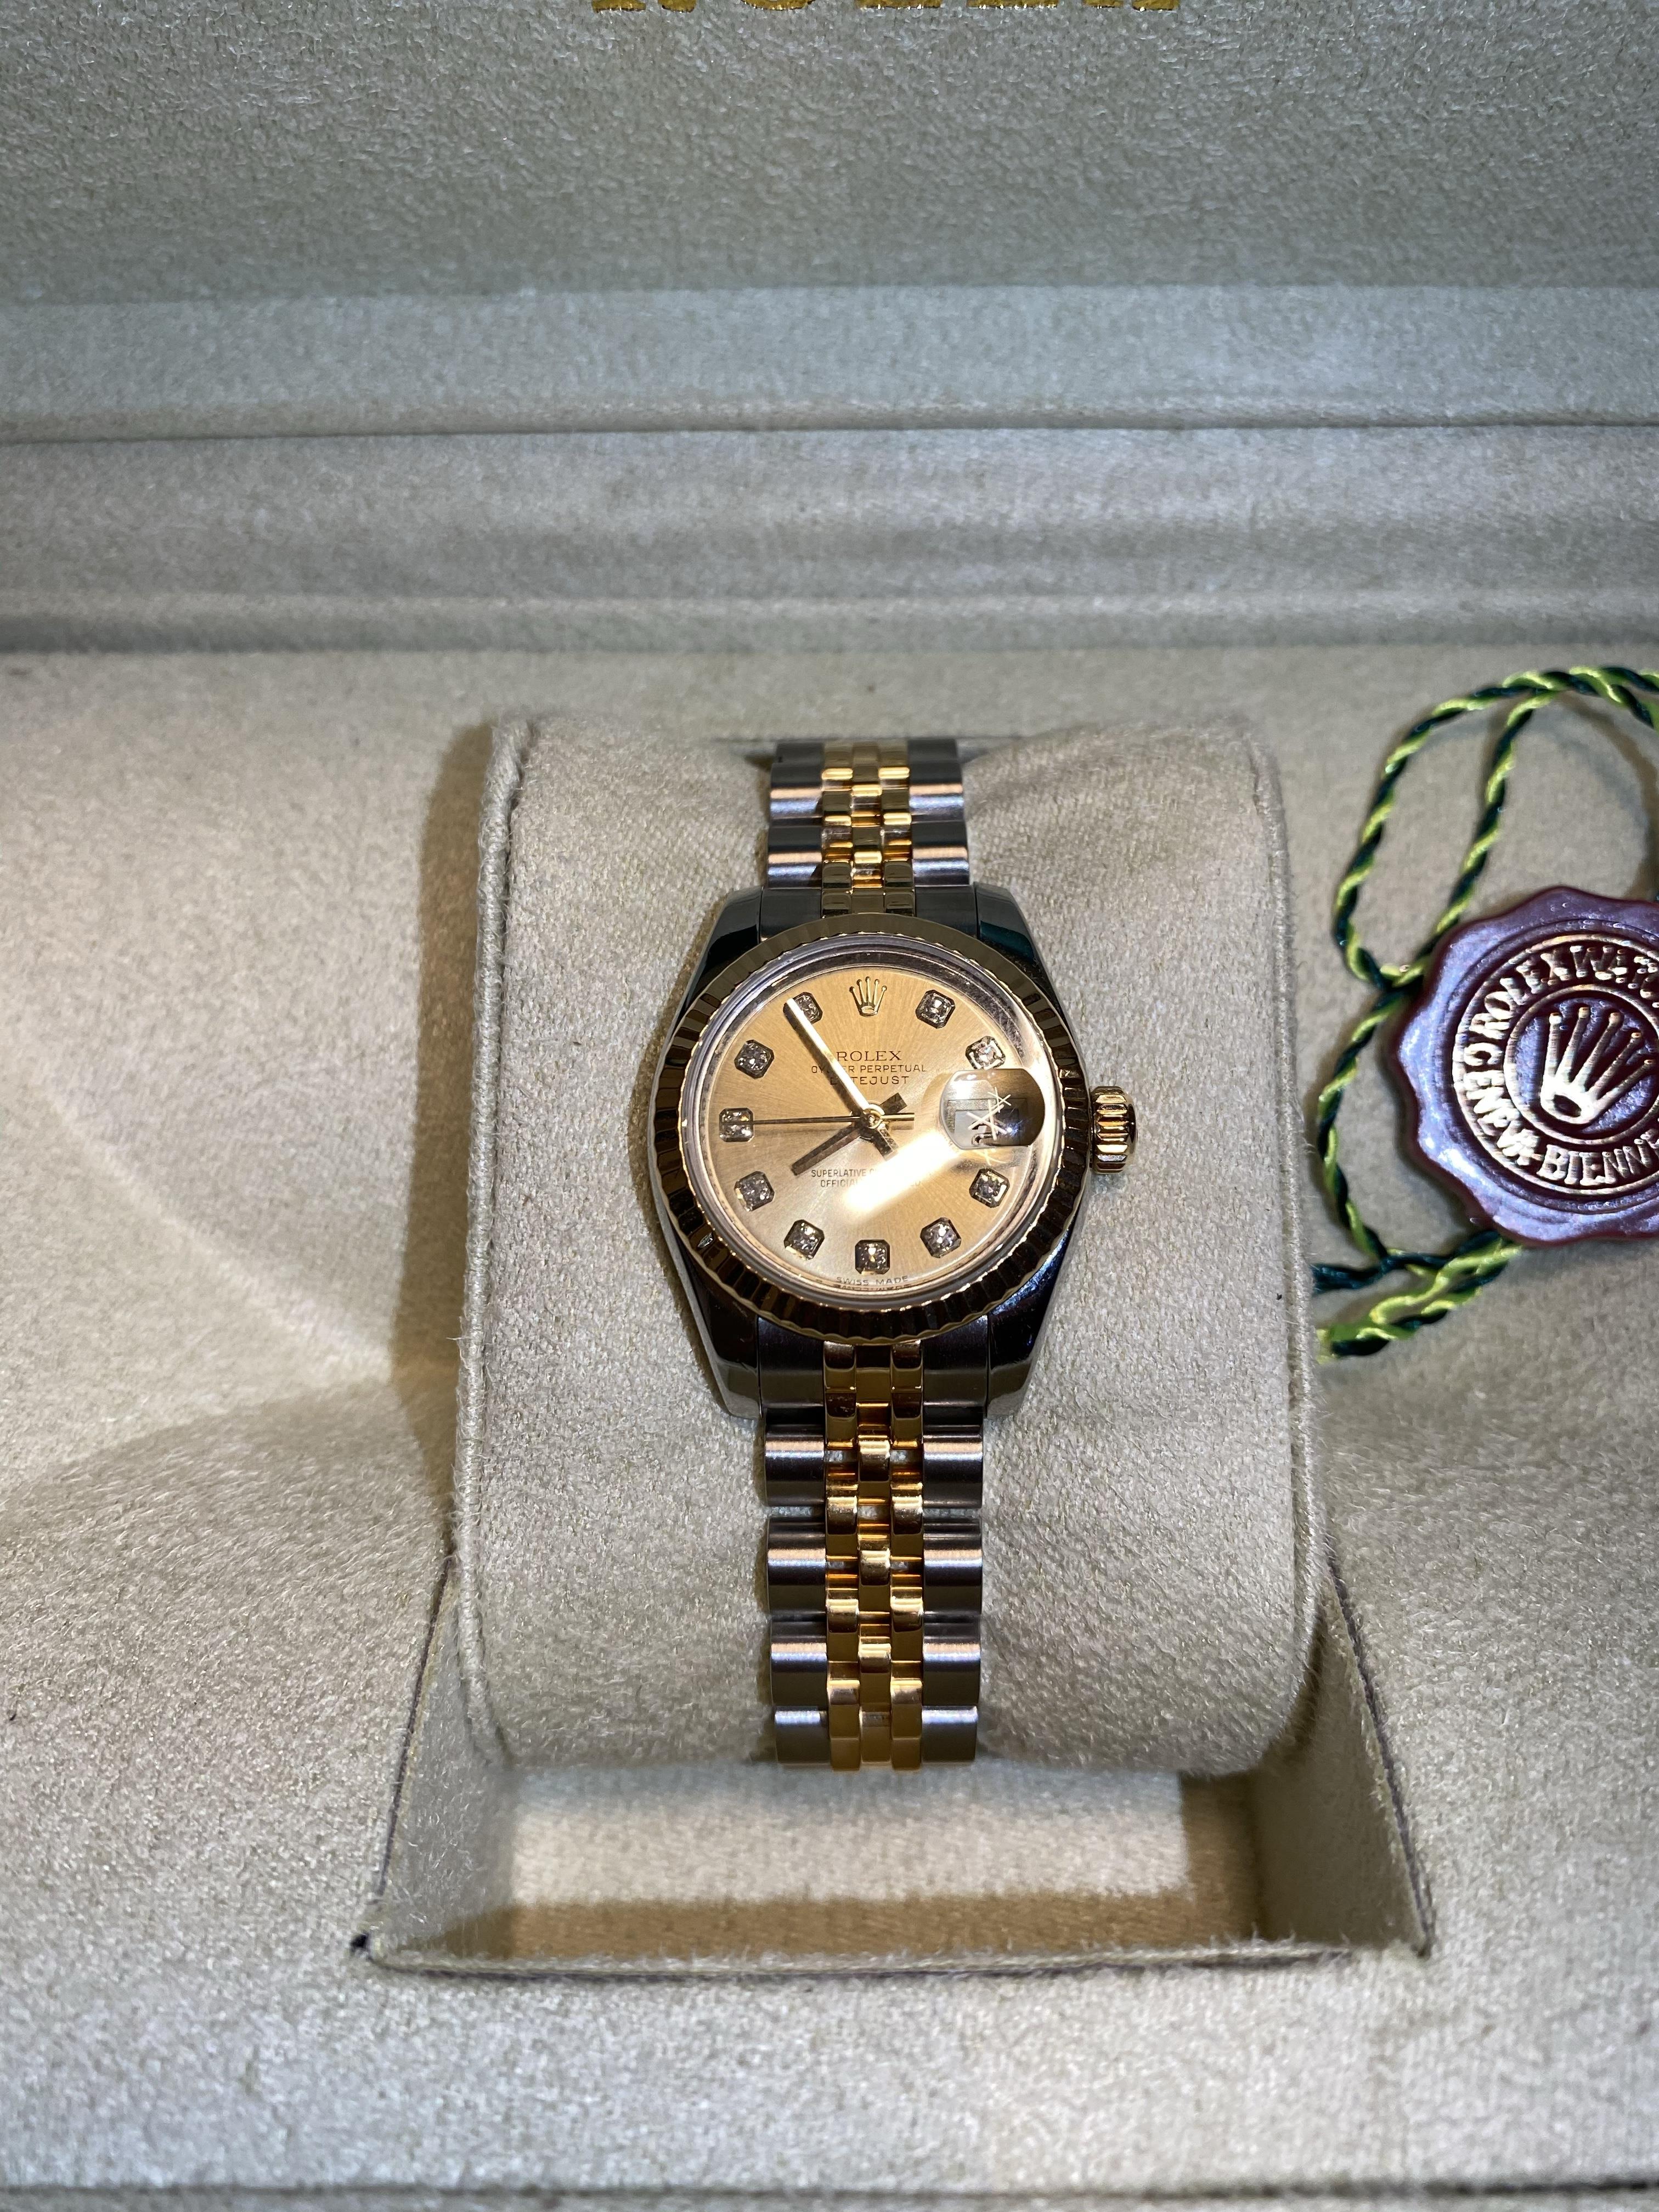 Ladies Rolex Datejust 179173 18k Gold & Stainless Steel *Factory Diamond Dial *Hardly Worn From New - Image 9 of 13